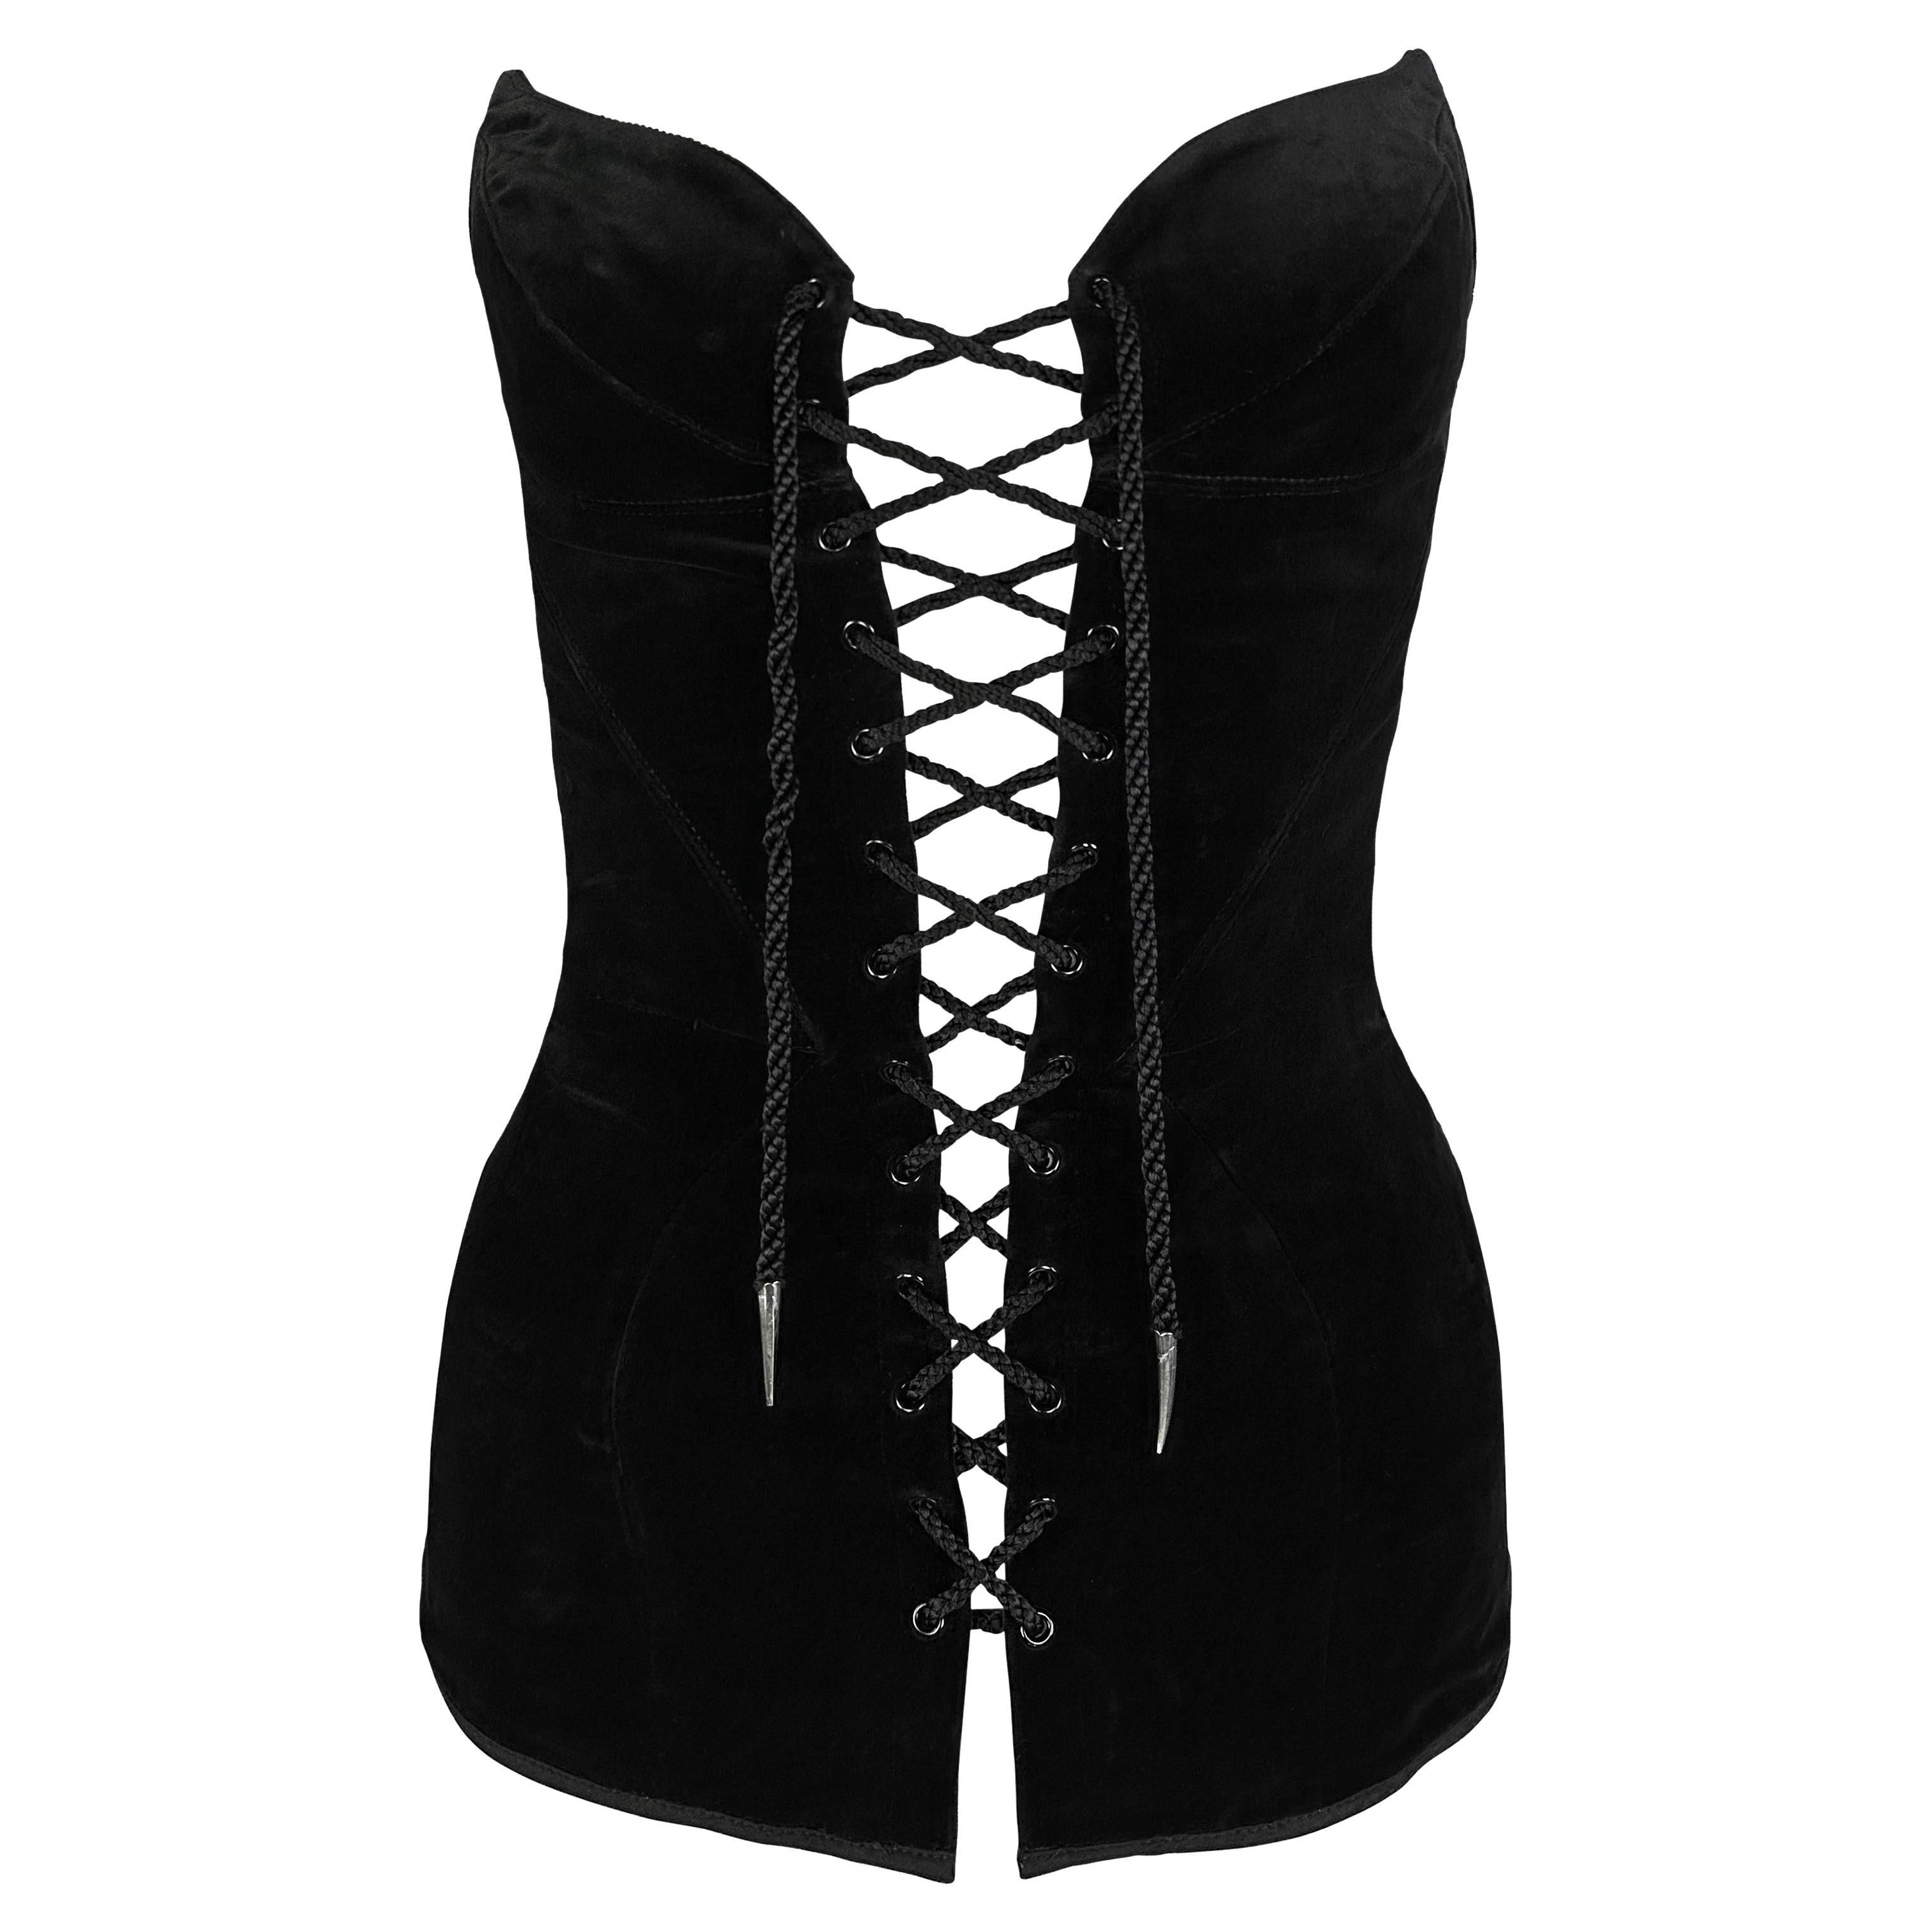 Late 1980s Thierry Mugler Velvet Lace-Up Pointed Strapless Bustier Corset Black In Excellent Condition For Sale In West Hollywood, CA